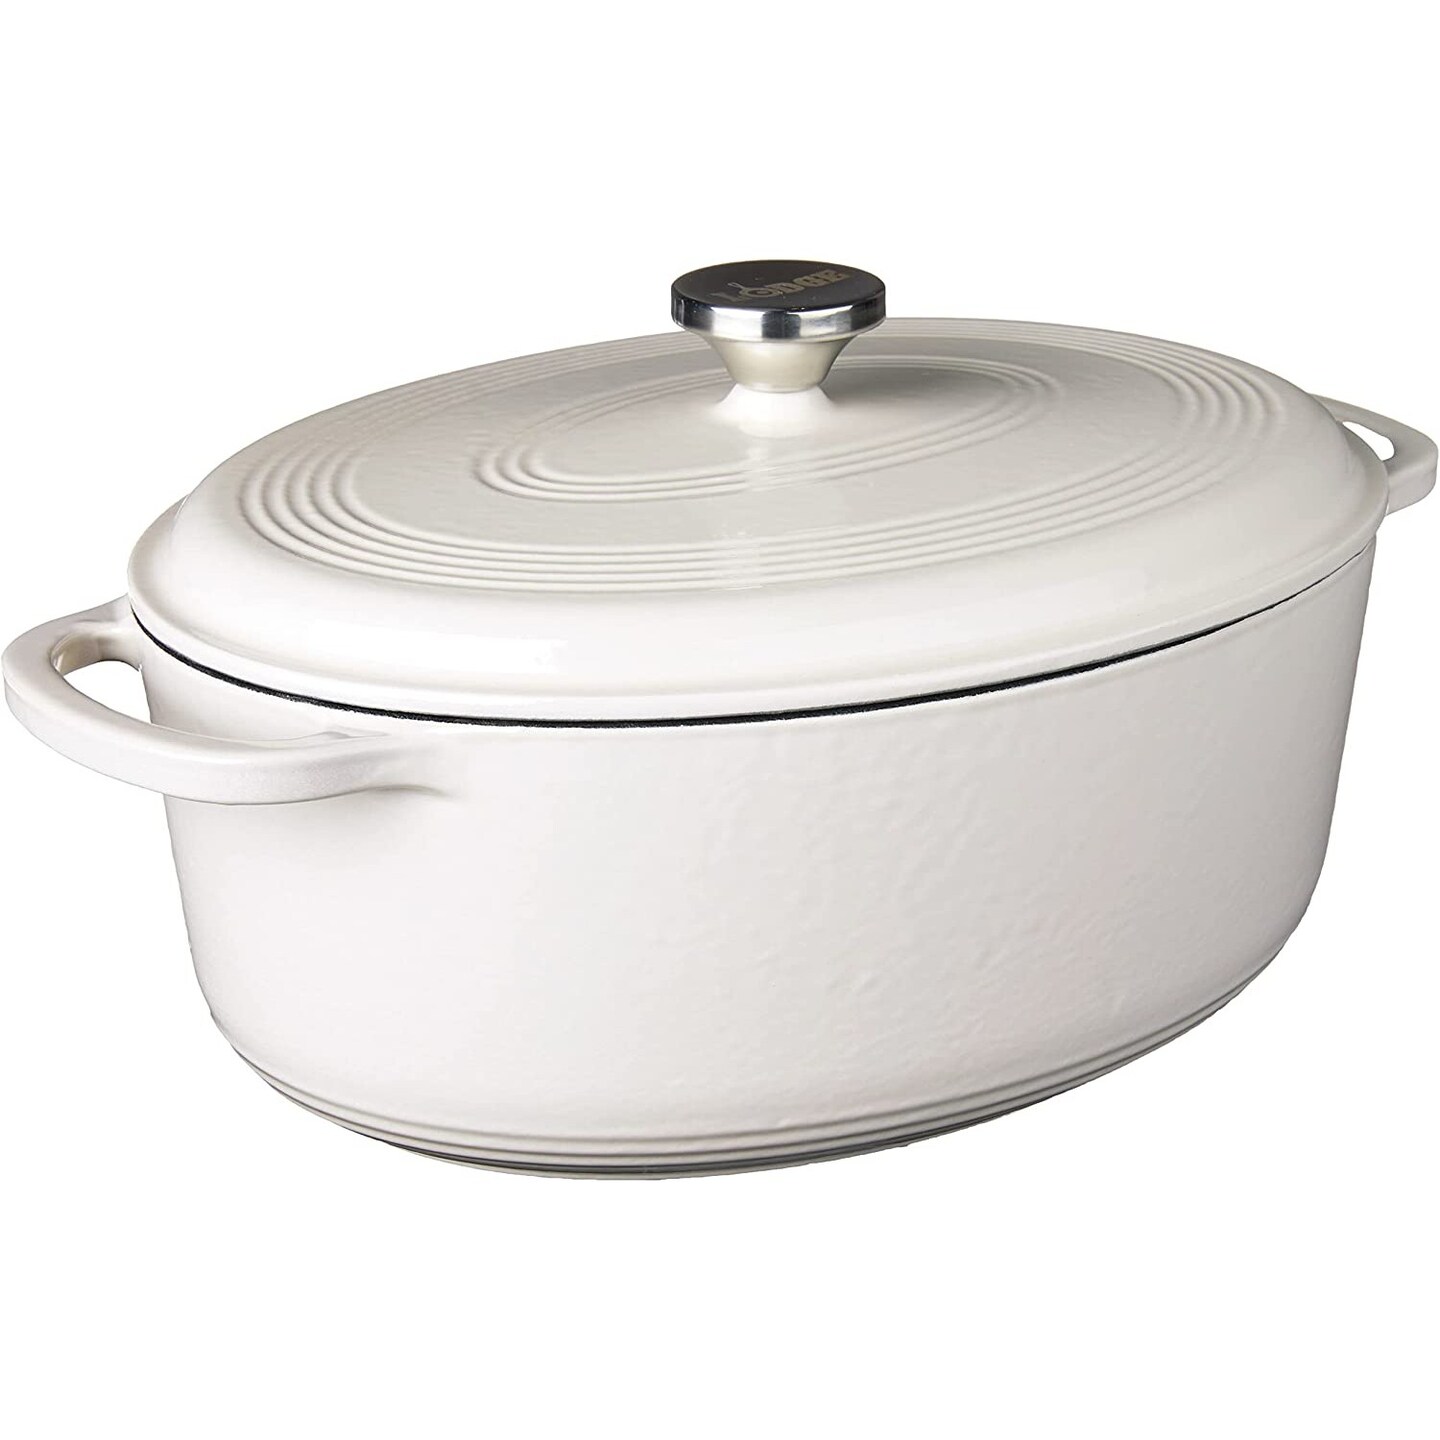  Lodge Enameled Cast Iron Dutch Oven, 3 Qt, Oyster: Home &  Kitchen